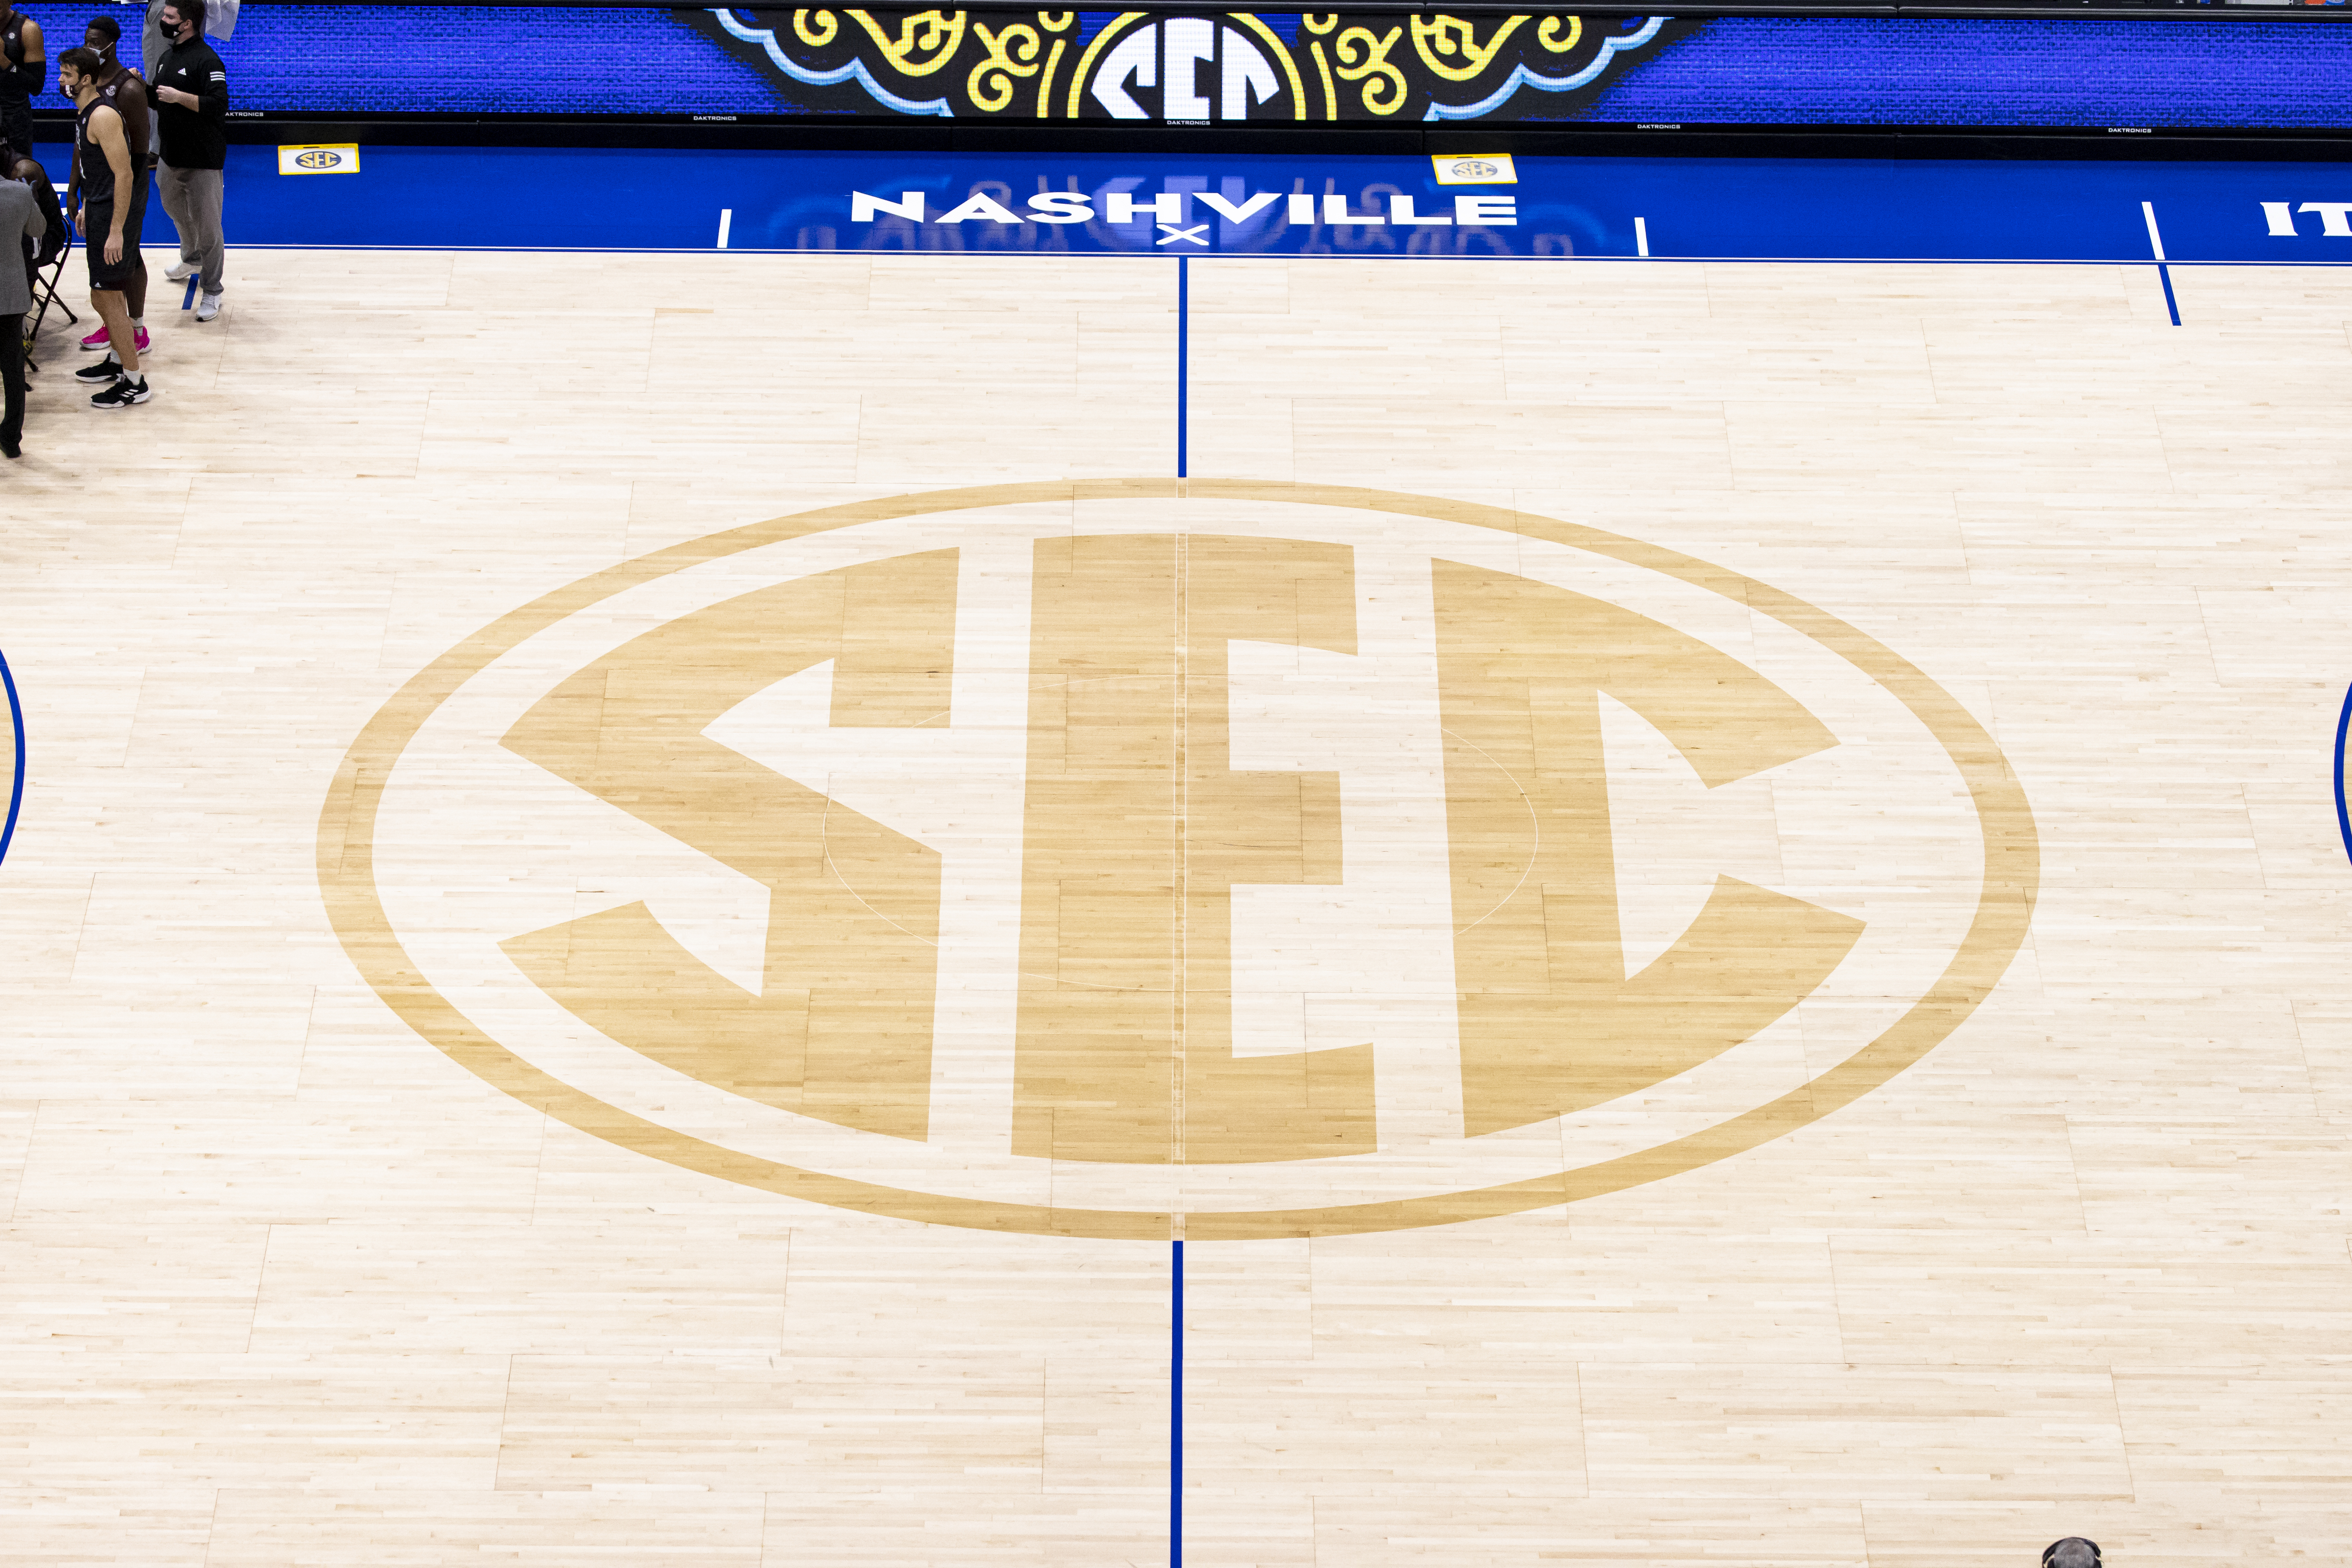 SEC mens basketball tournament live stream How to watch online, TV, time, full schedule